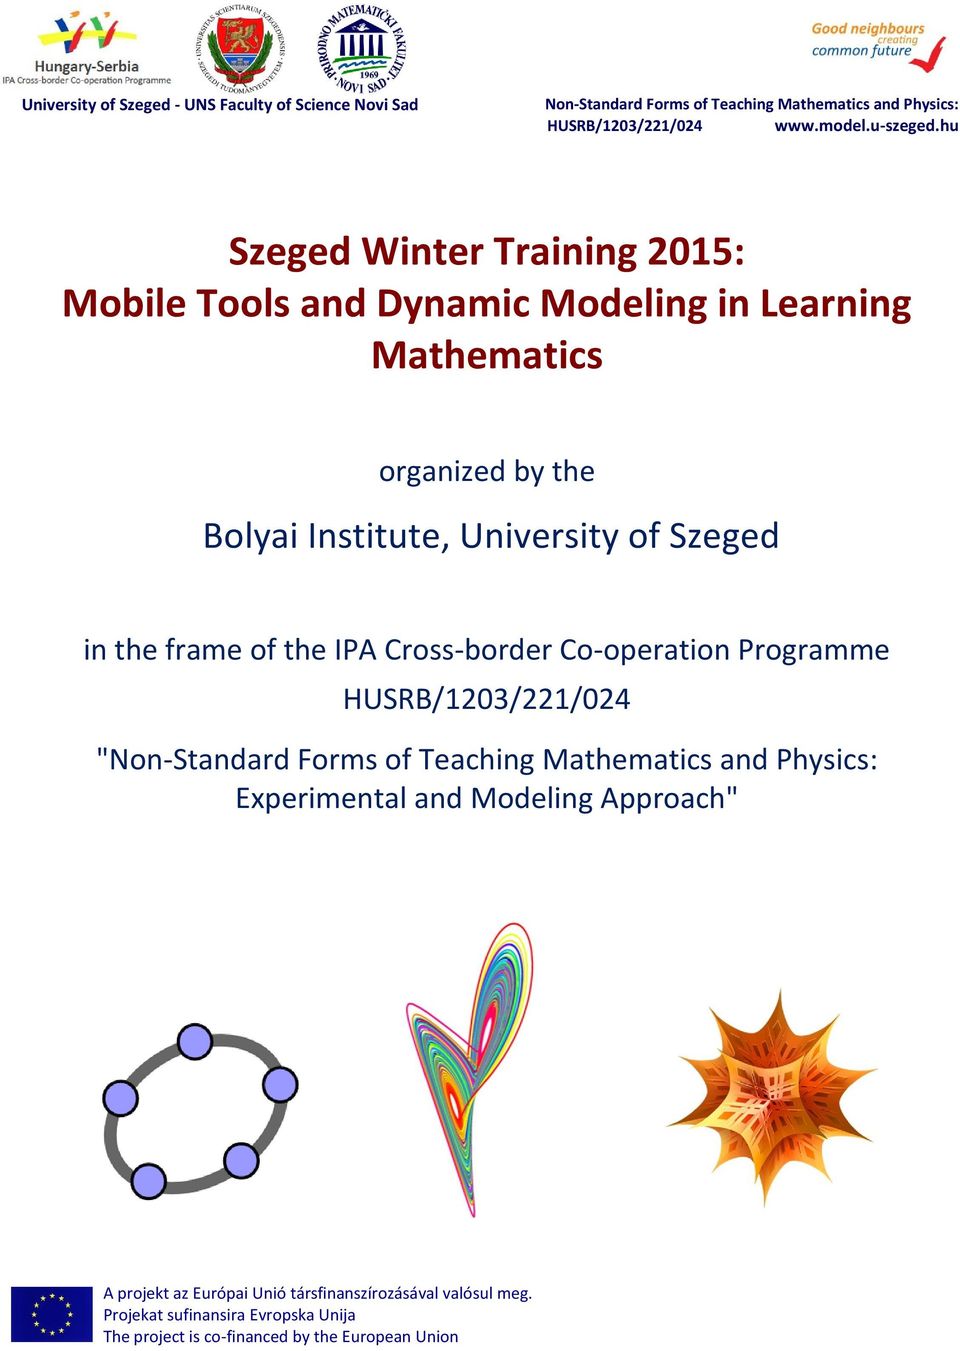 frame of the IPA Cross-border Co-operation Programme HUSRB/1203/221/024 "Non-Standard Forms of Teaching Mathematics and Physics: Experimental and